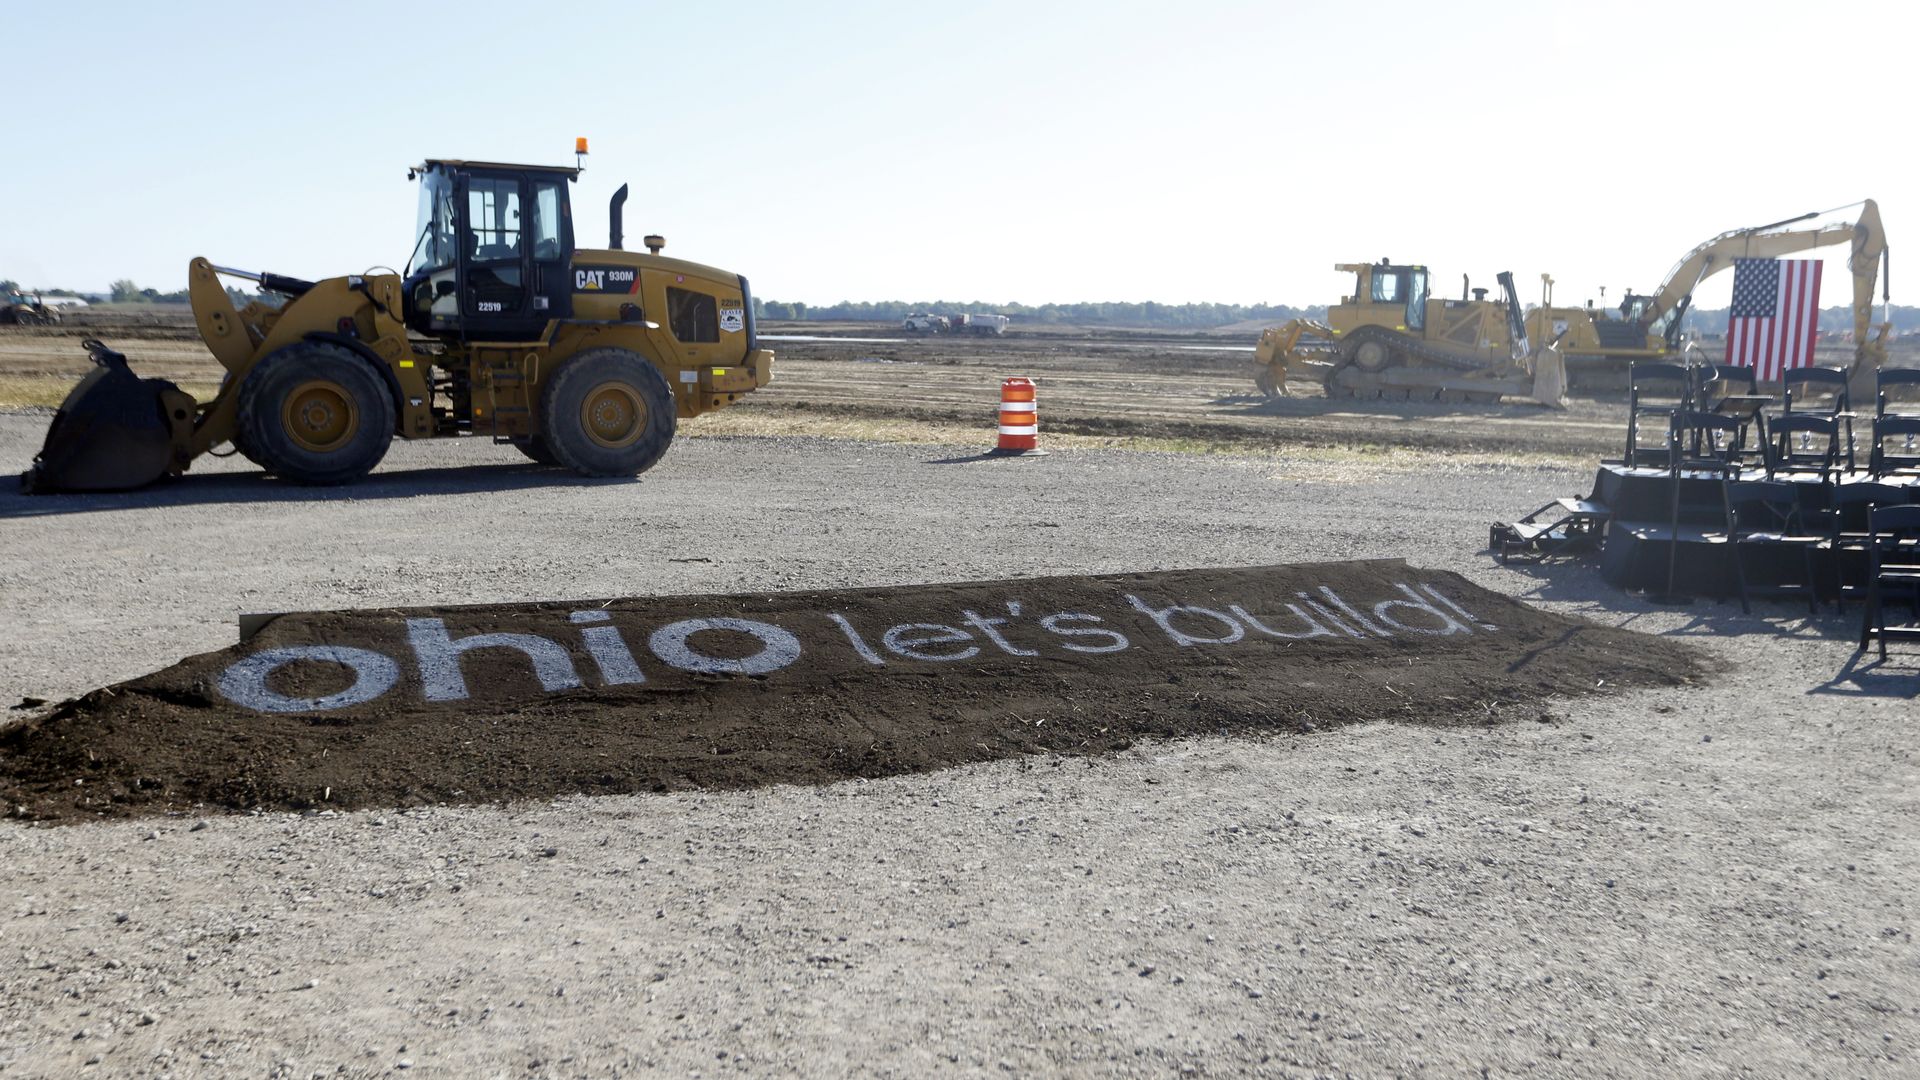 A tractor at the Intel construction site in Ohio, with letters on dirt reading "Ohio let's build."